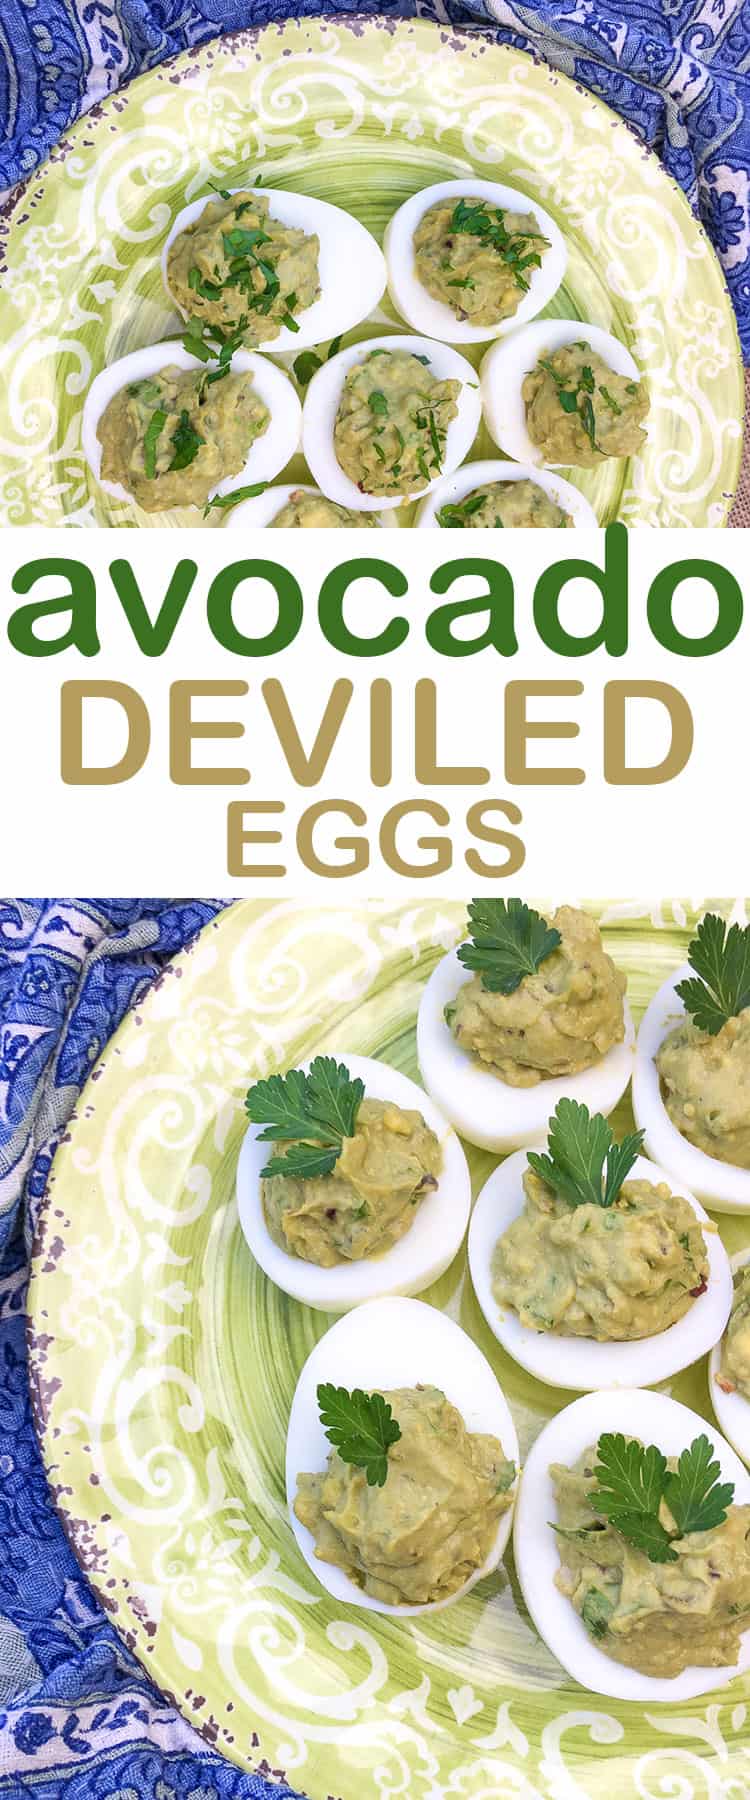 avocado deviled eggs on a plate that is green and white